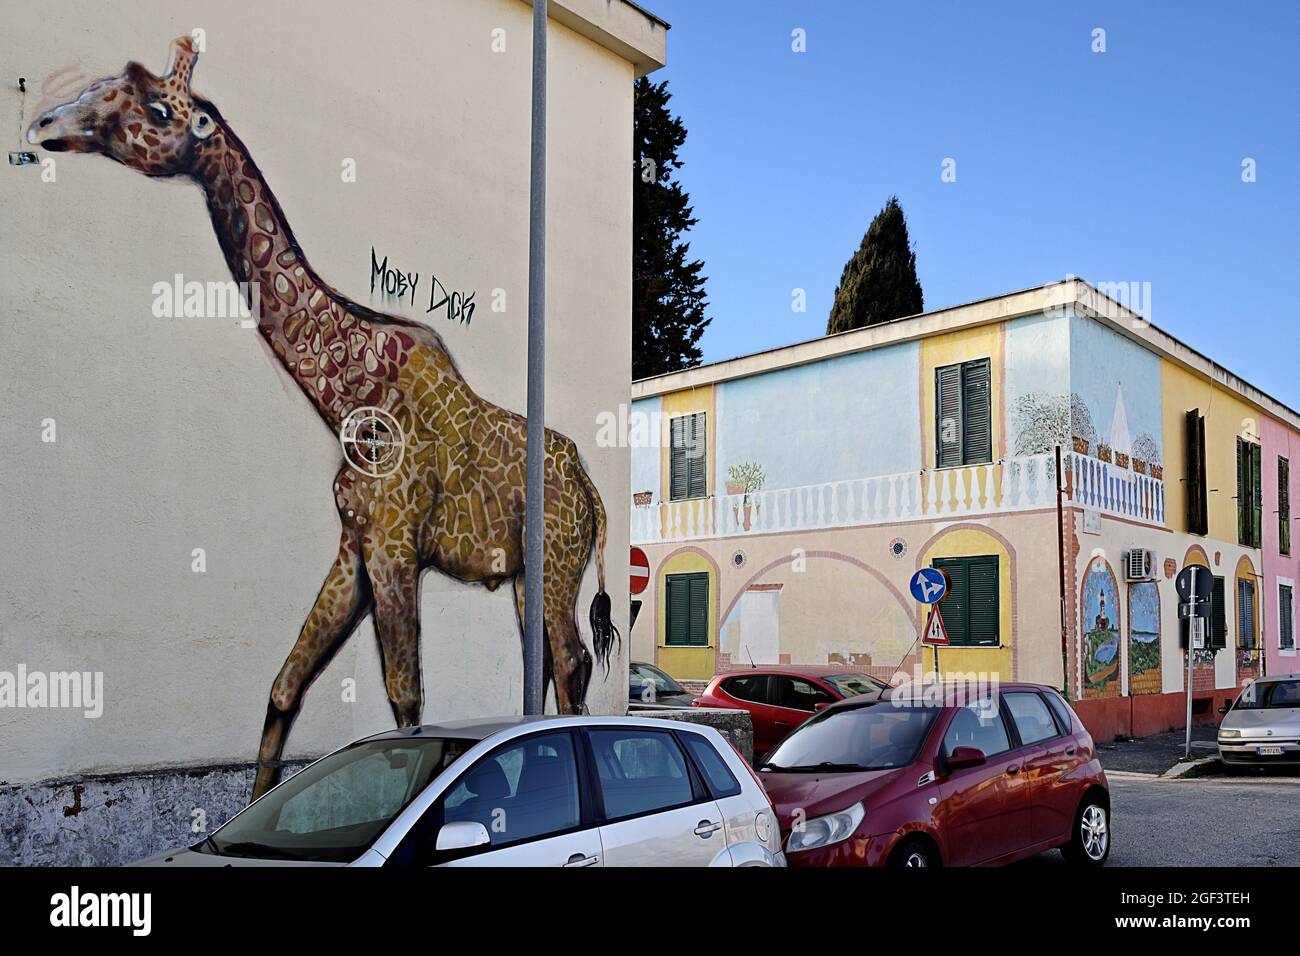 Glimpse of a street graffiti mural depicting a giraffe painted on a wall of a house in the Trullo district. Rome, Italy, Europe. Blue sky, copy space. Stock Photo